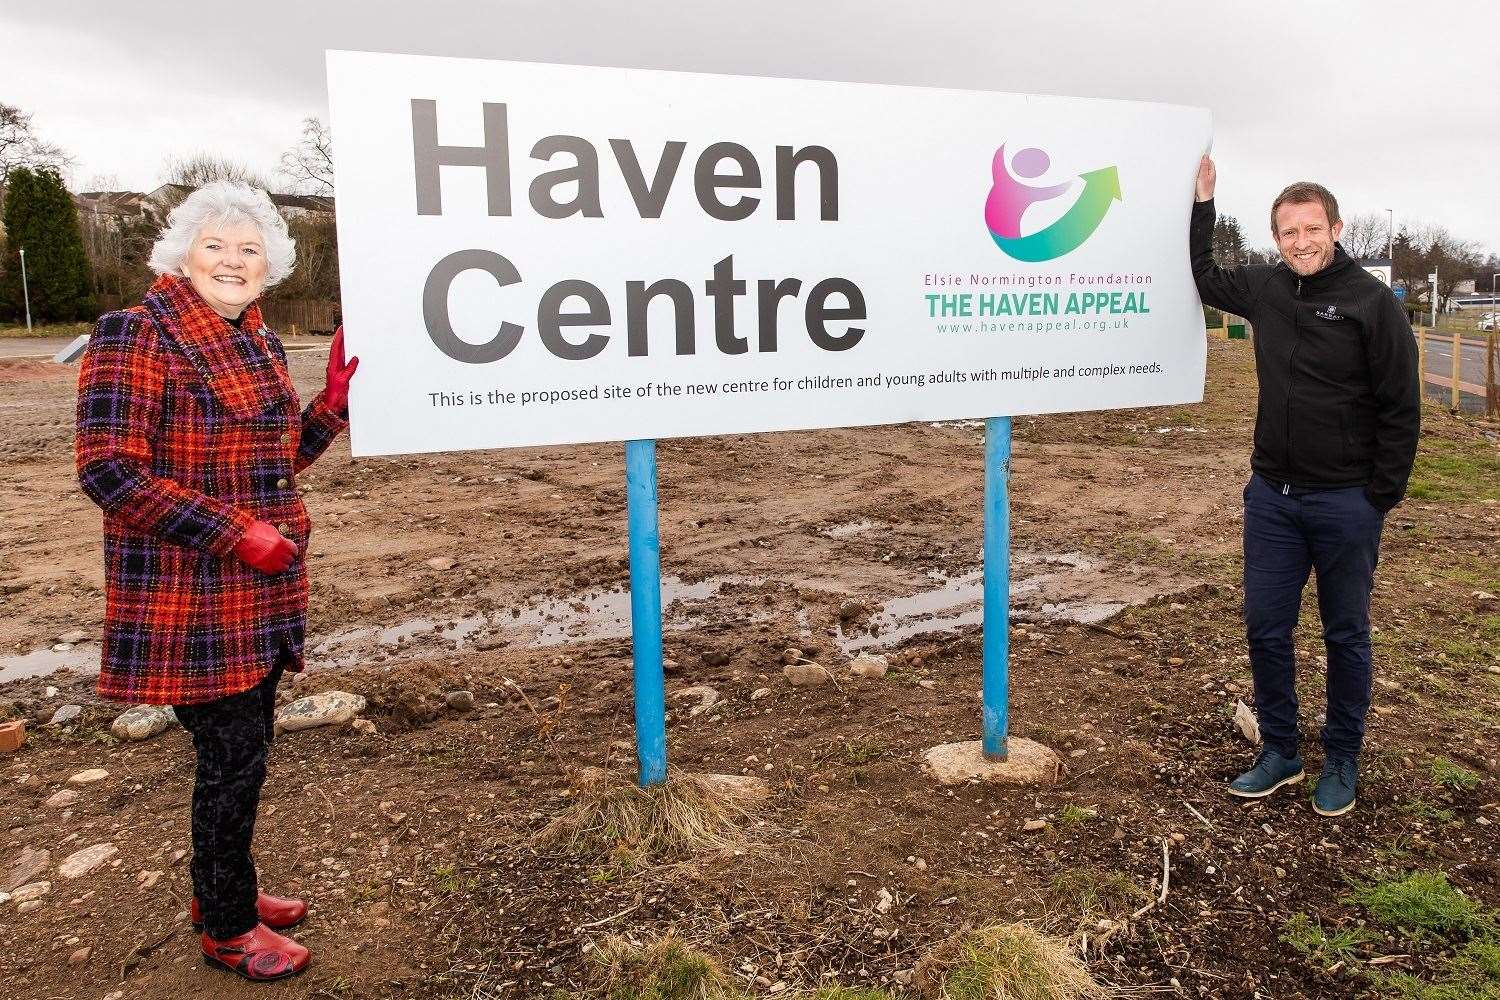 Elsie Normington, of the Elsie Normington Foundation, with Alan Fraser, construction manager for Barratt Homes North Scotland, on the site of the planned Haven Centre.